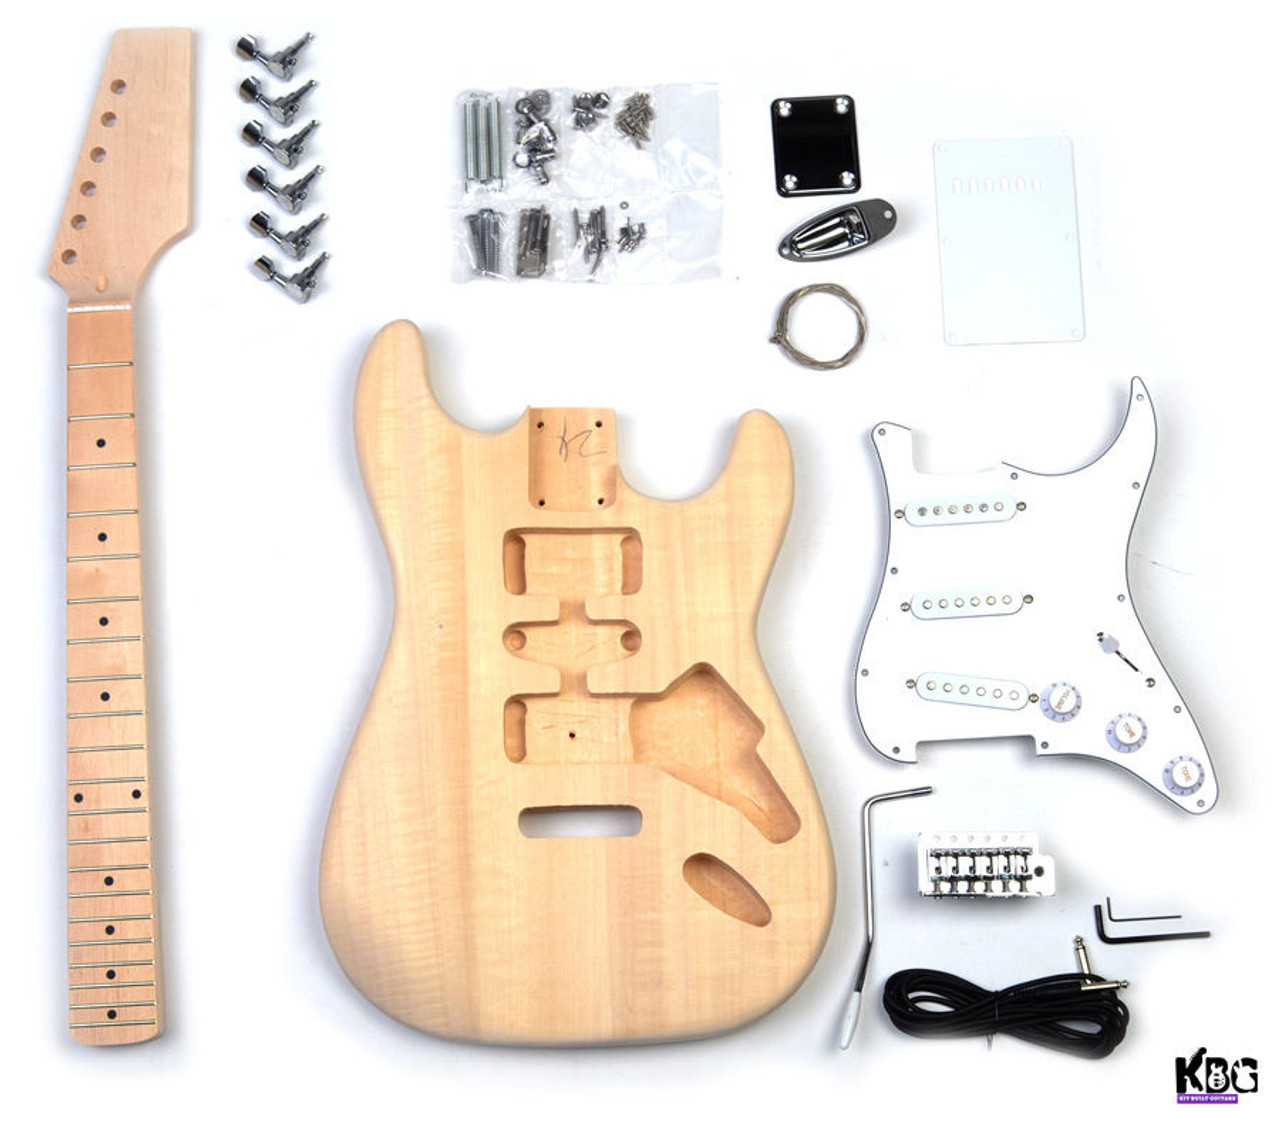 DIY Guitar Strat Stratocaster ST Style Build Your Own Kit